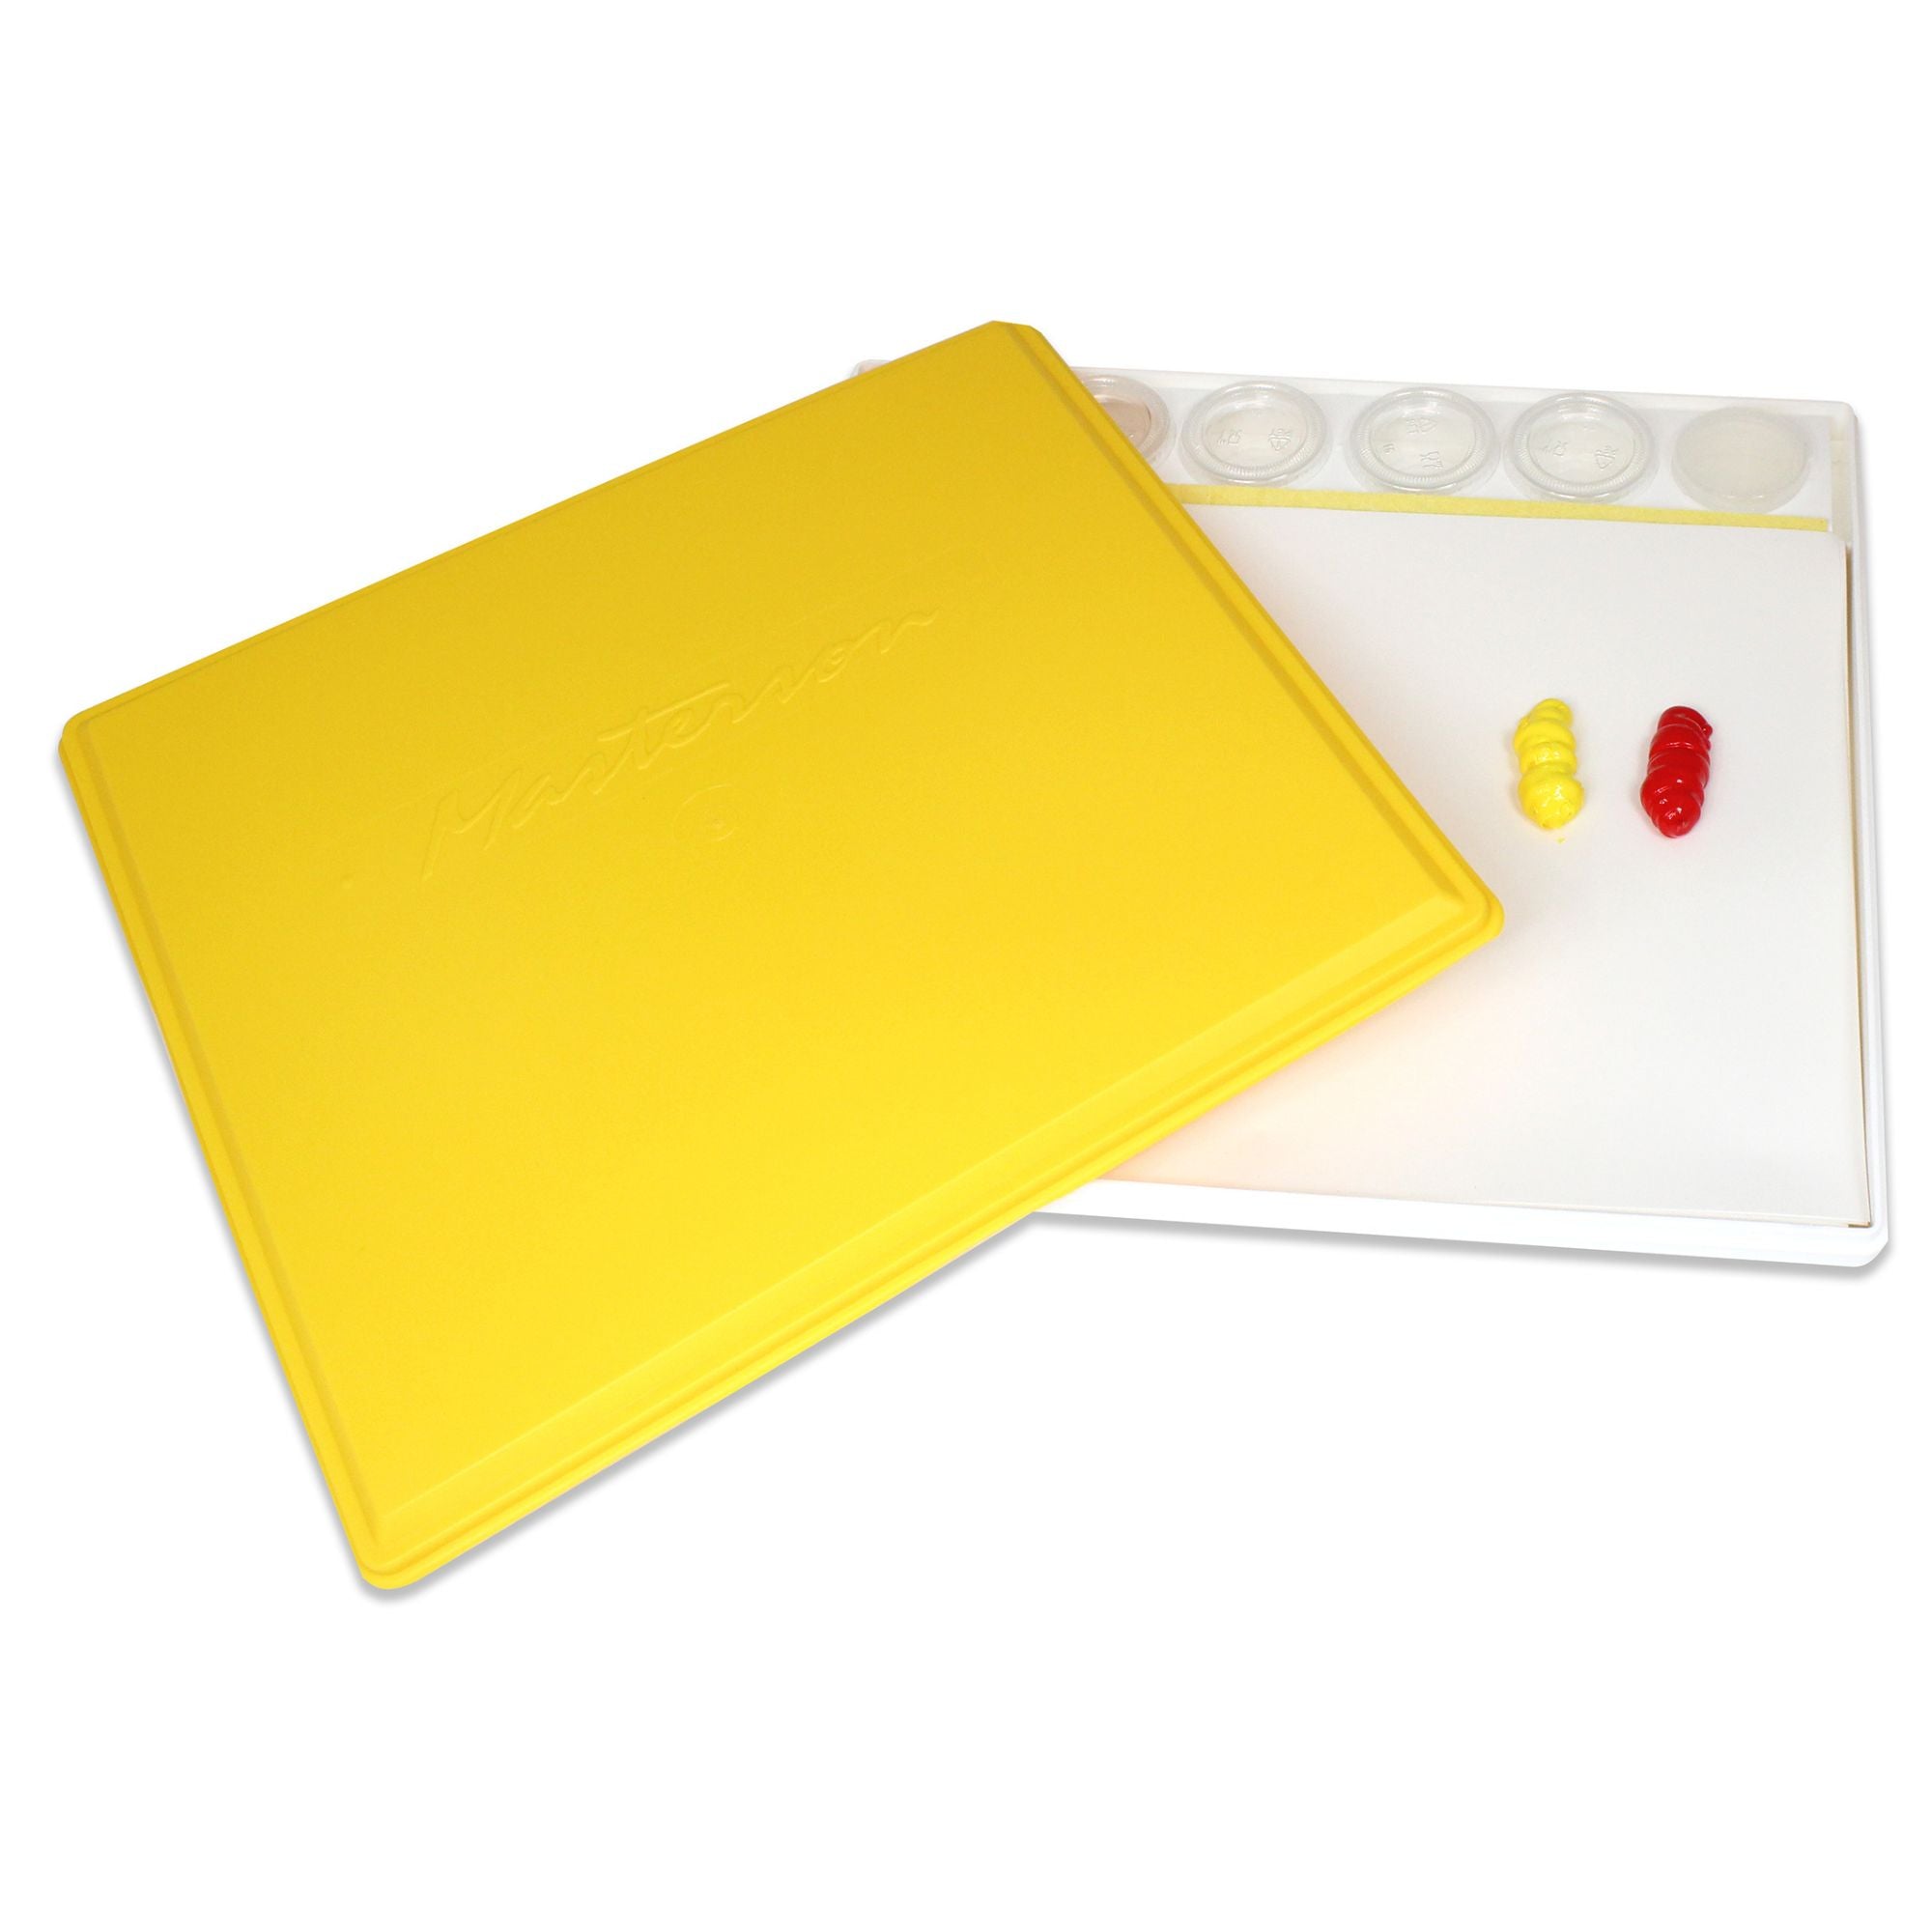 Masterson Sta-Wet Painter's Pal Palette and Accessories